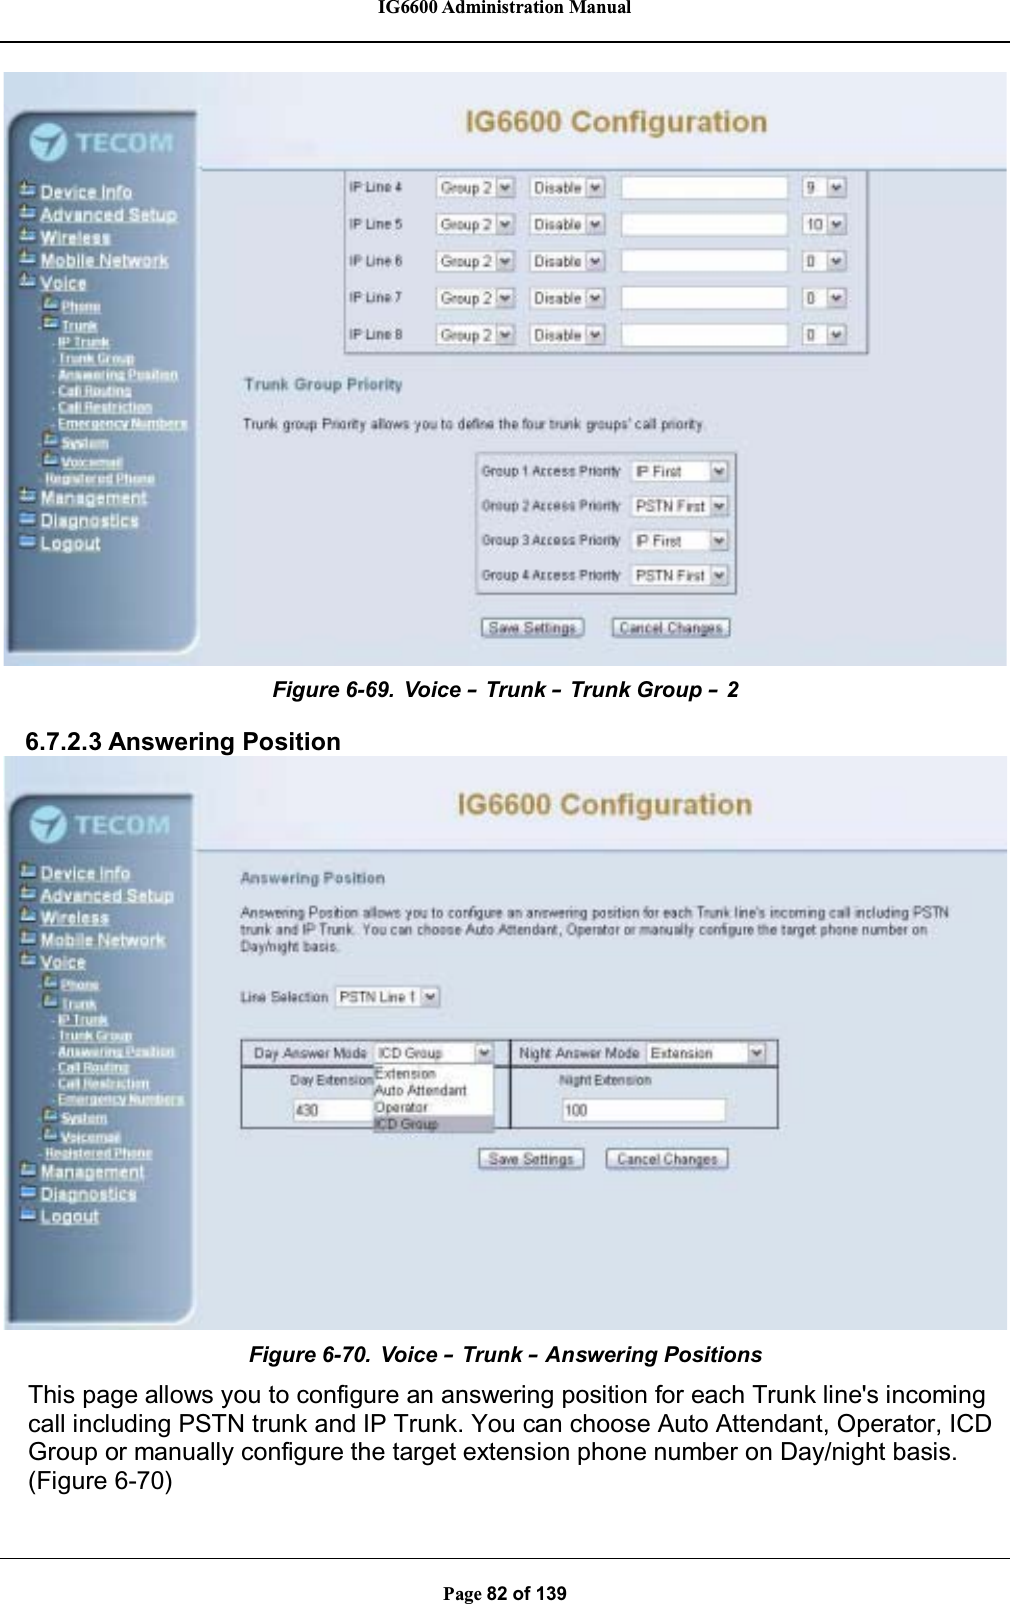 IG6600 Administration ManualPage 82 of 139Figure 6-69. Voice –Trunk –Trunk Group –26.7.2.3 Answering PositionFigure 6-70. Voice –Trunk –Answering PositionsThis page allows you to configure an answering position for each Trunk line&apos;s incomingcall including PSTN trunk and IP Trunk. You can choose Auto Attendant, Operator, ICDGroup or manually configure the target extension phone number on Day/night basis.(Figure 6-70)